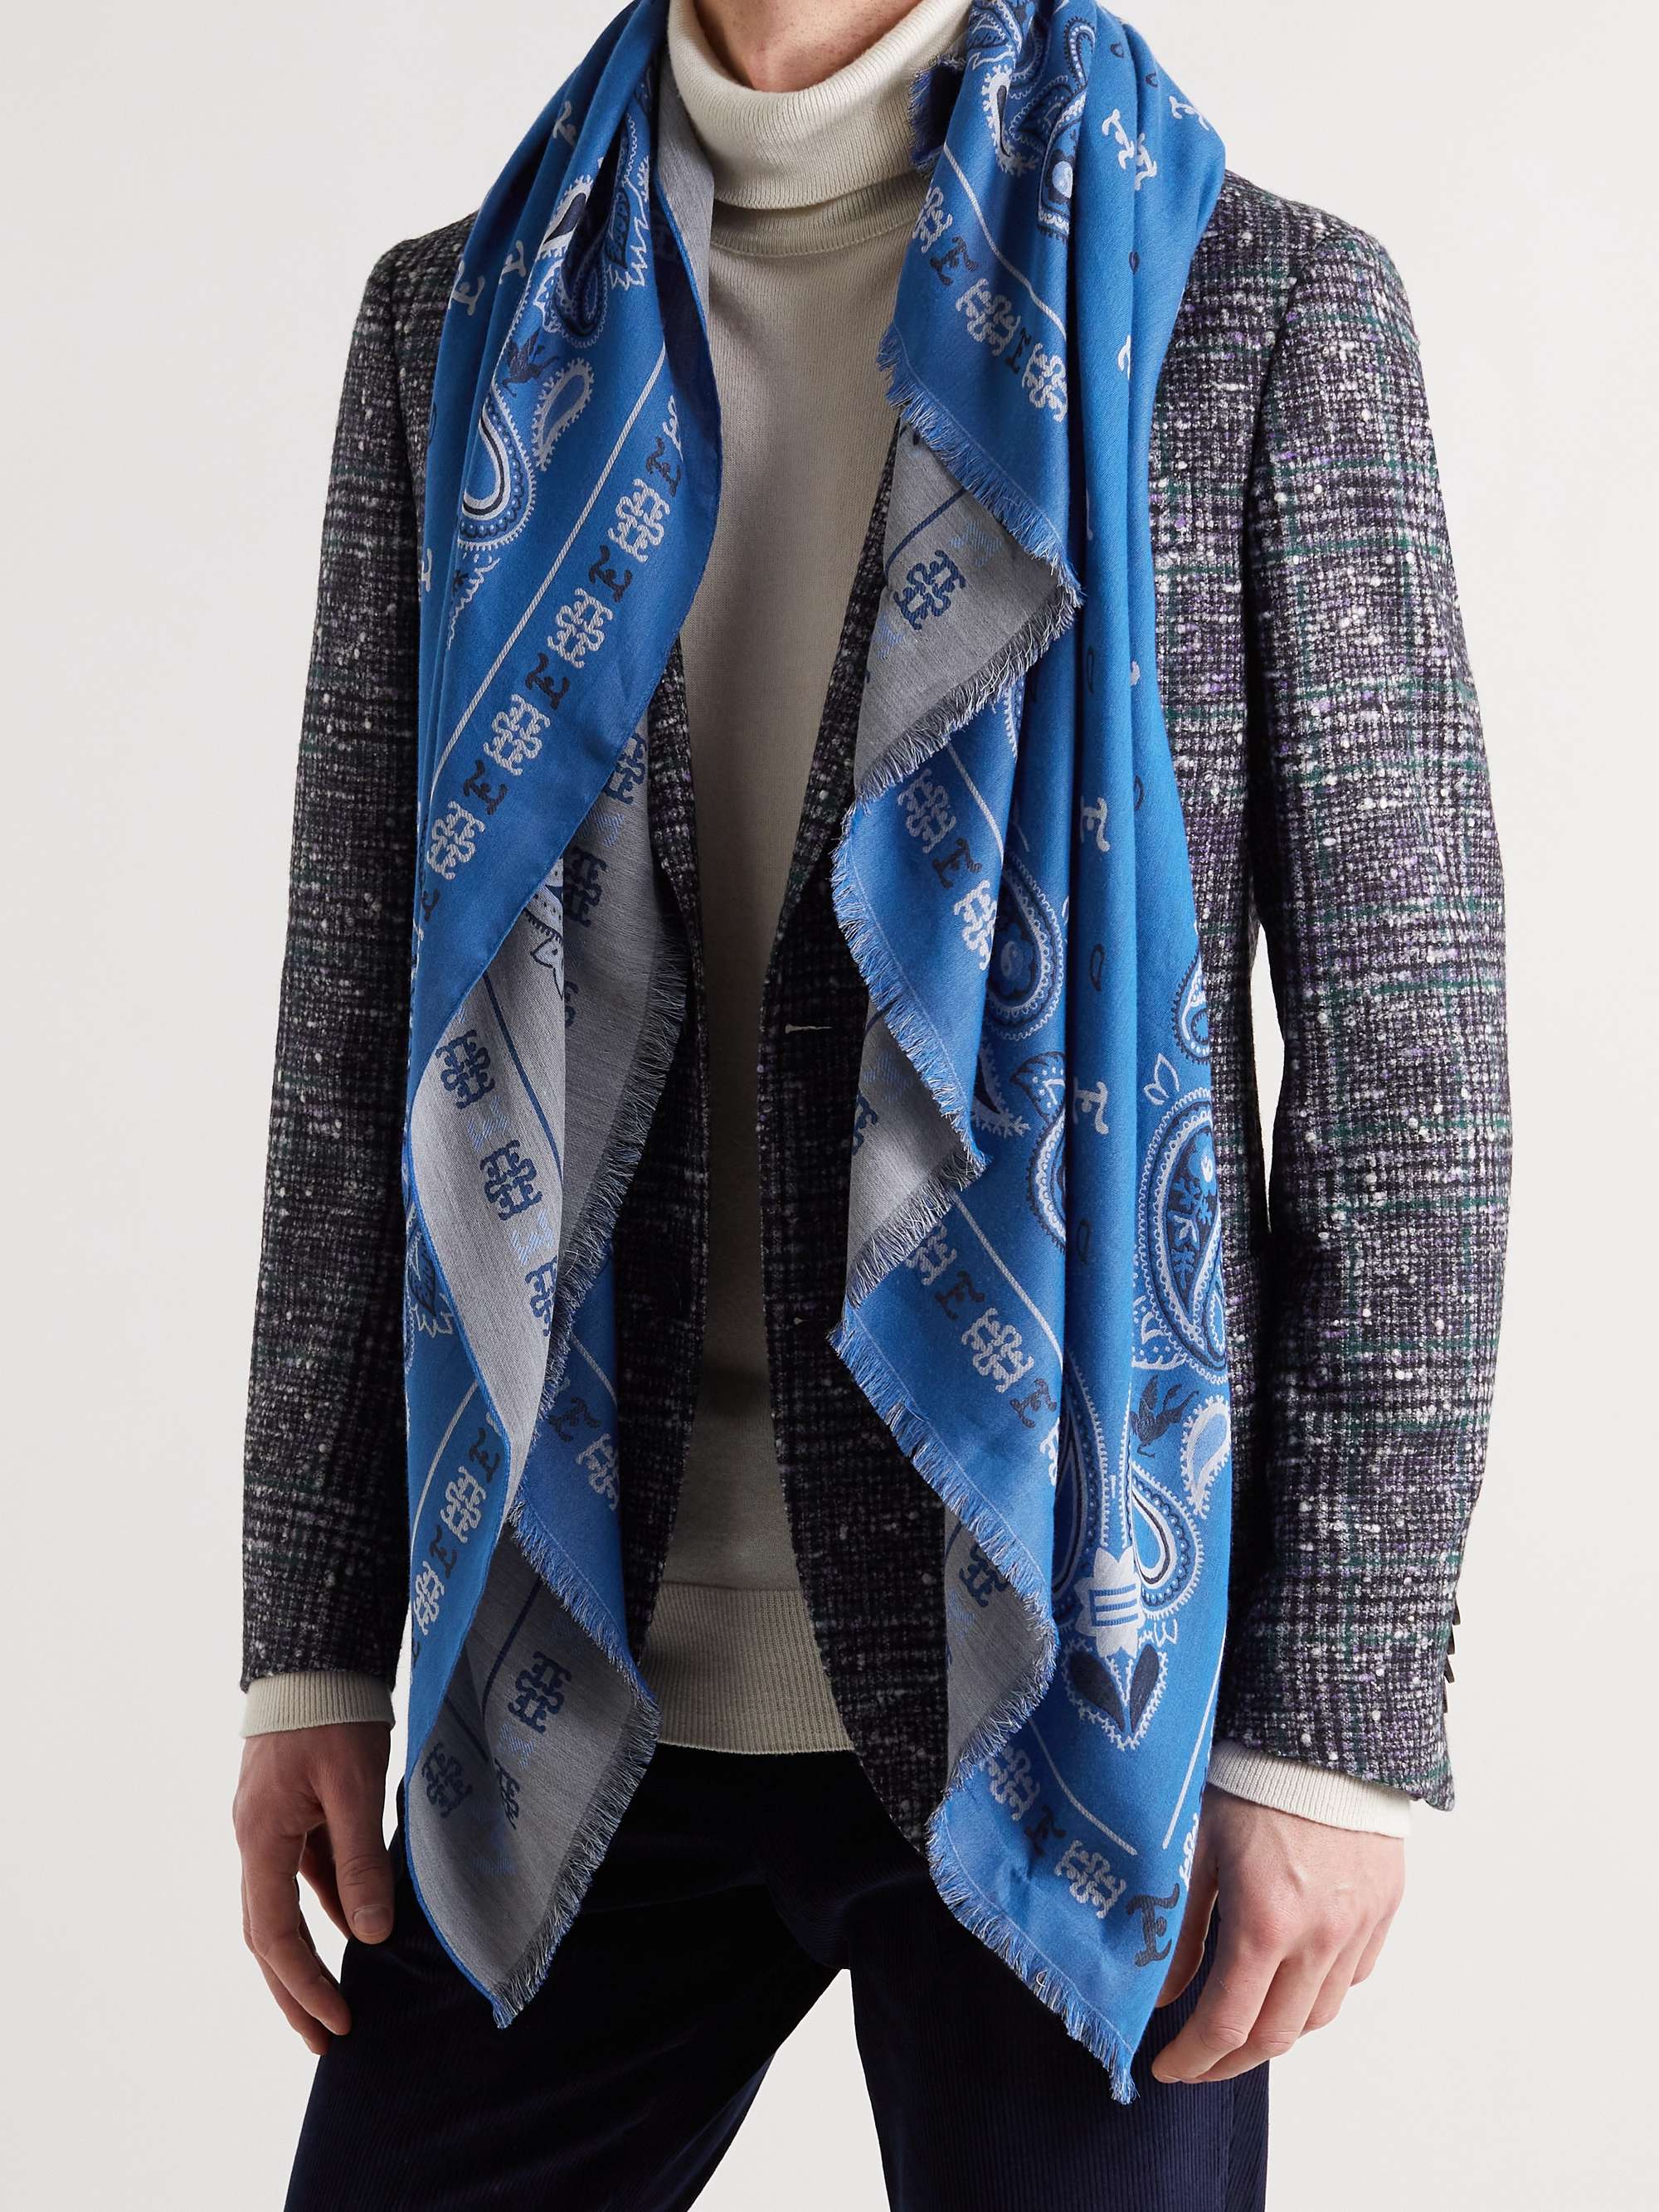 ETRO Fringed Bandana-Print Cotton and Silk-Blend Voile Scarf